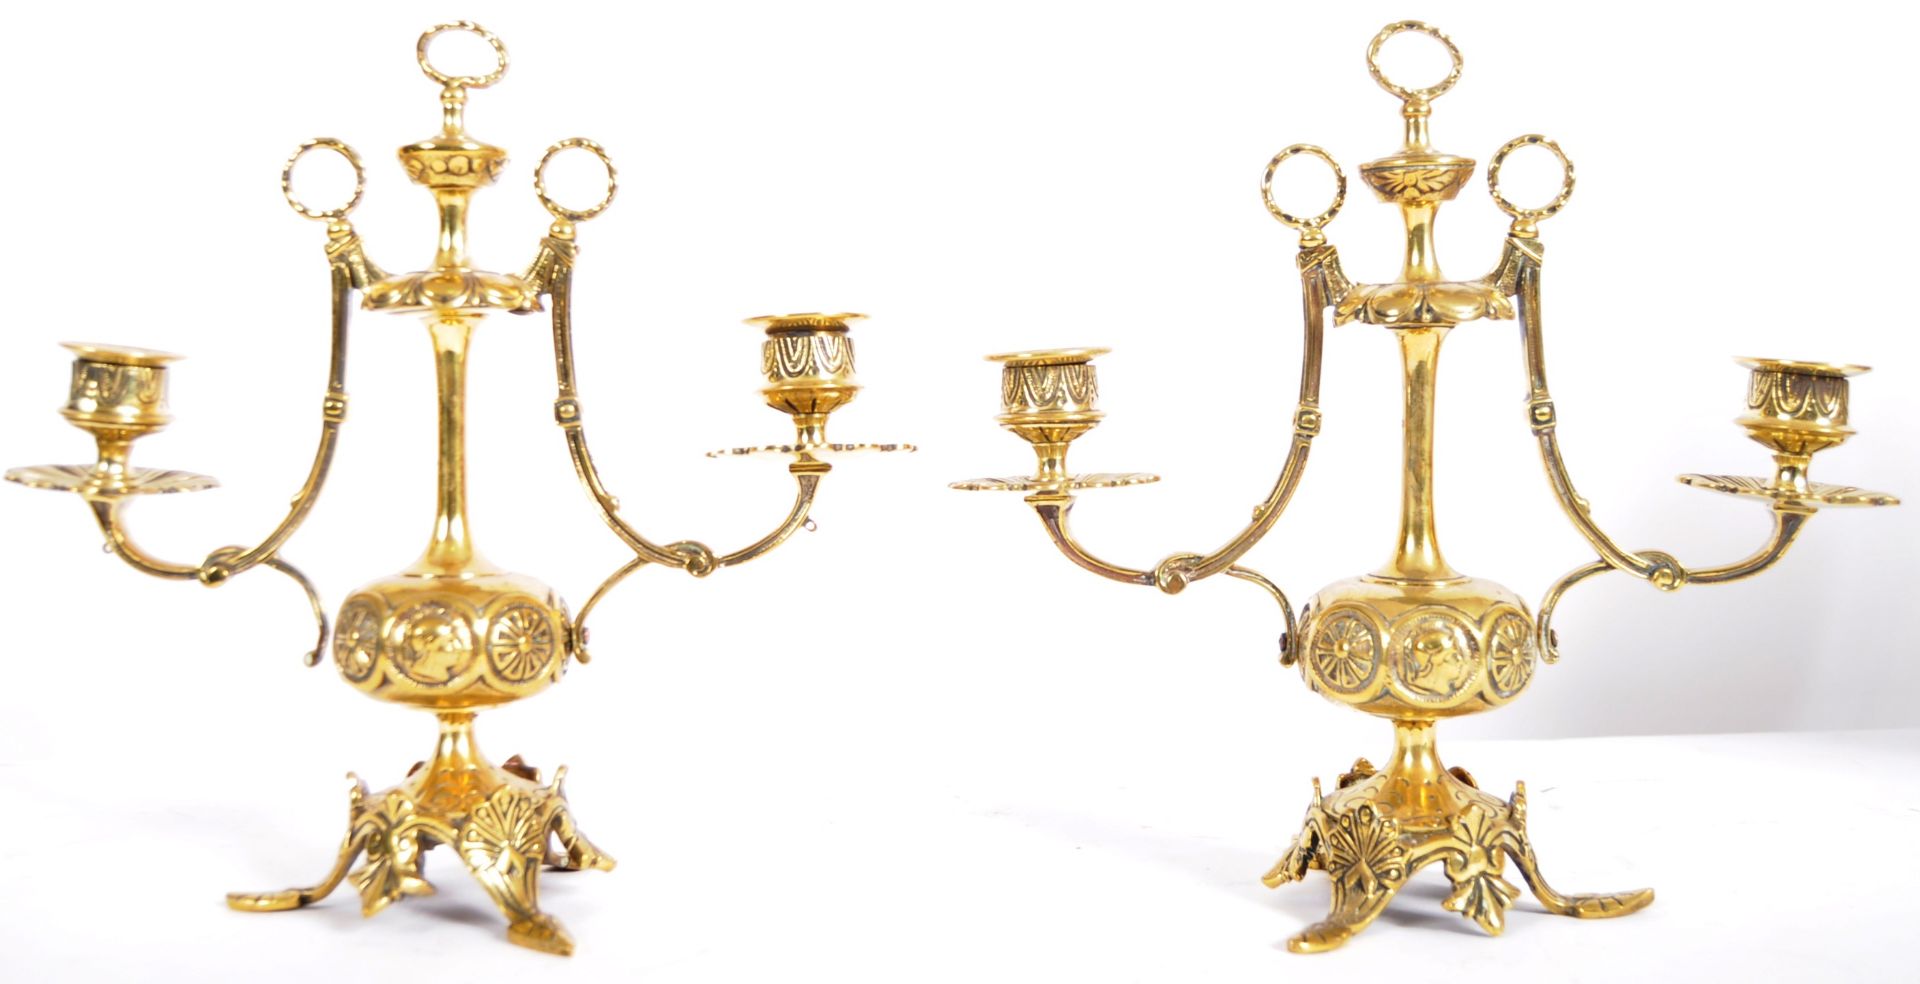 PAIR OF 19TH CENTURY BRASS TWIN SCONCE CANDELABRA - Image 7 of 7